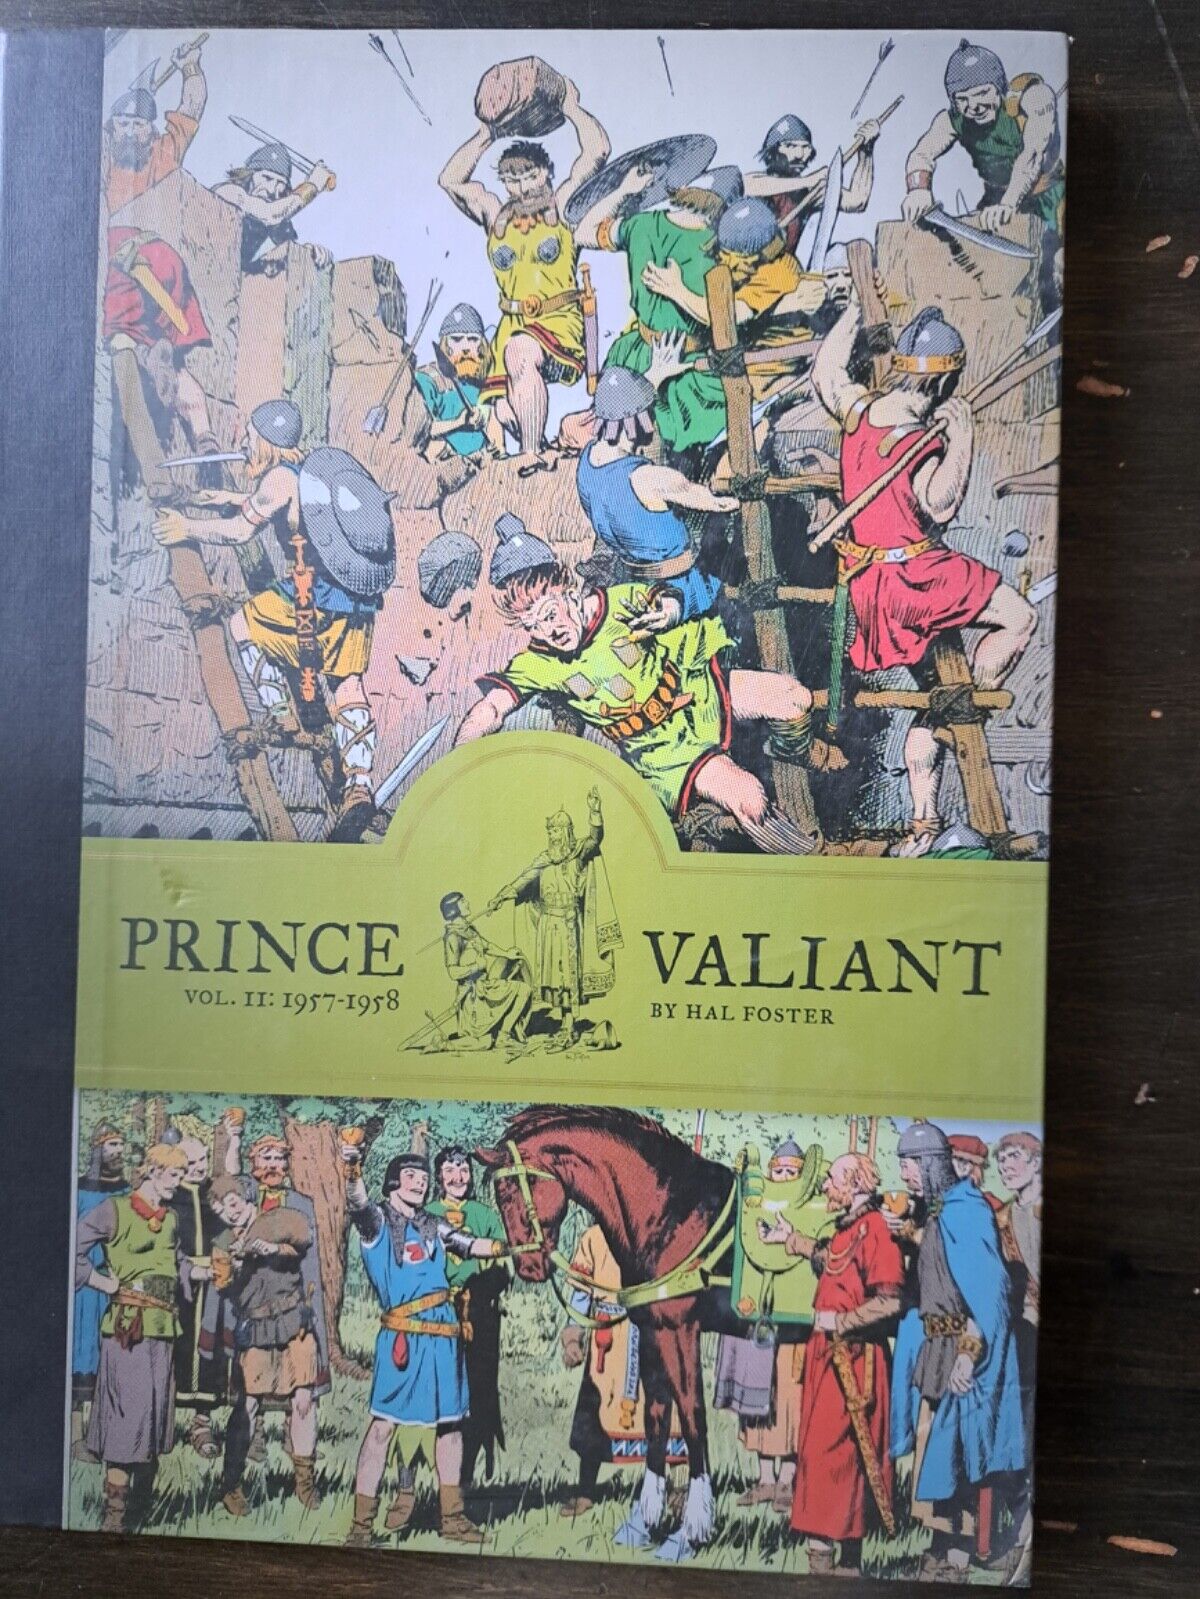 Prince Valiant by Hal Foster Volume 11 (Fantagraphics, Hardcover)